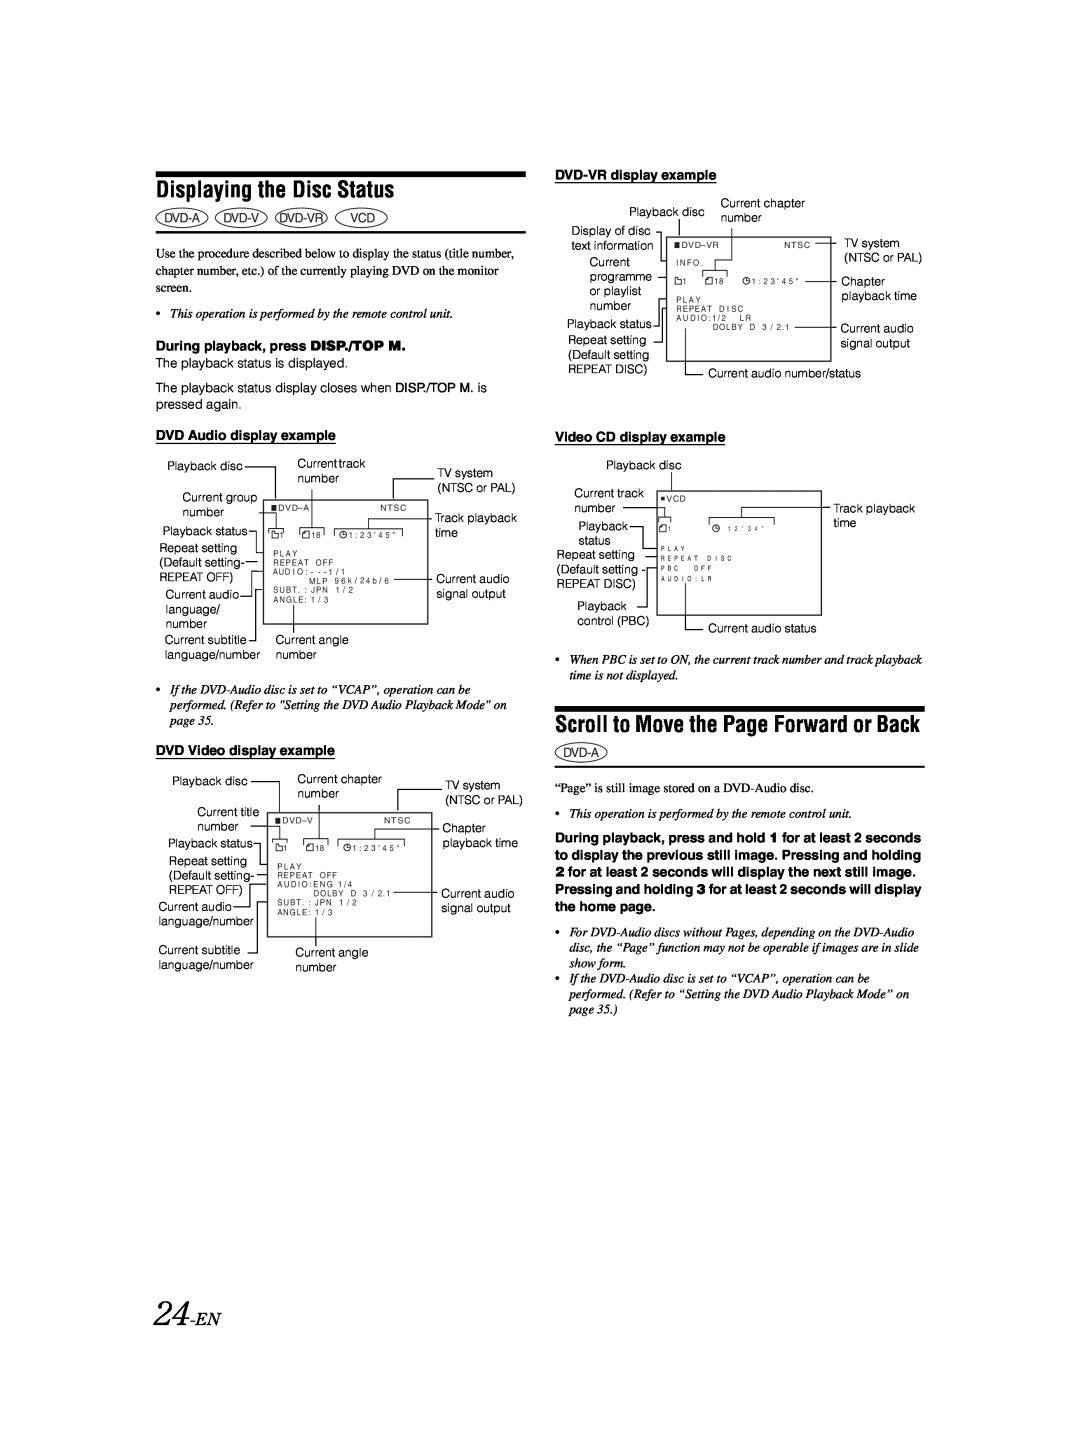 Alpine DVA-9861Ri owner manual Displaying the Disc Status, Scroll to Move the Page Forward or Back, 24-EN 